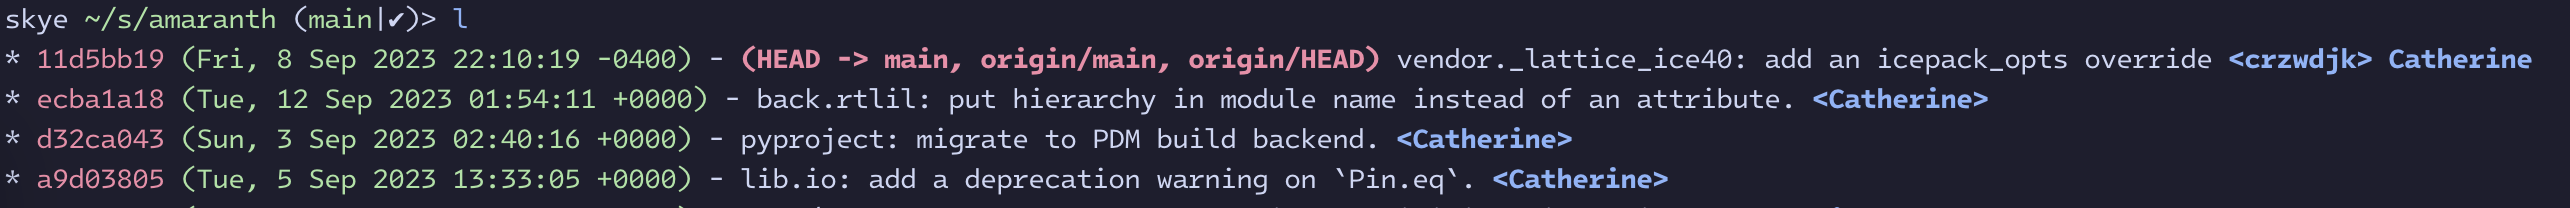  A console where “l” been entered; there’s a commit per line, but the first one ends in a name in angle brackets, followed by a different name. The following commits only have one name. 